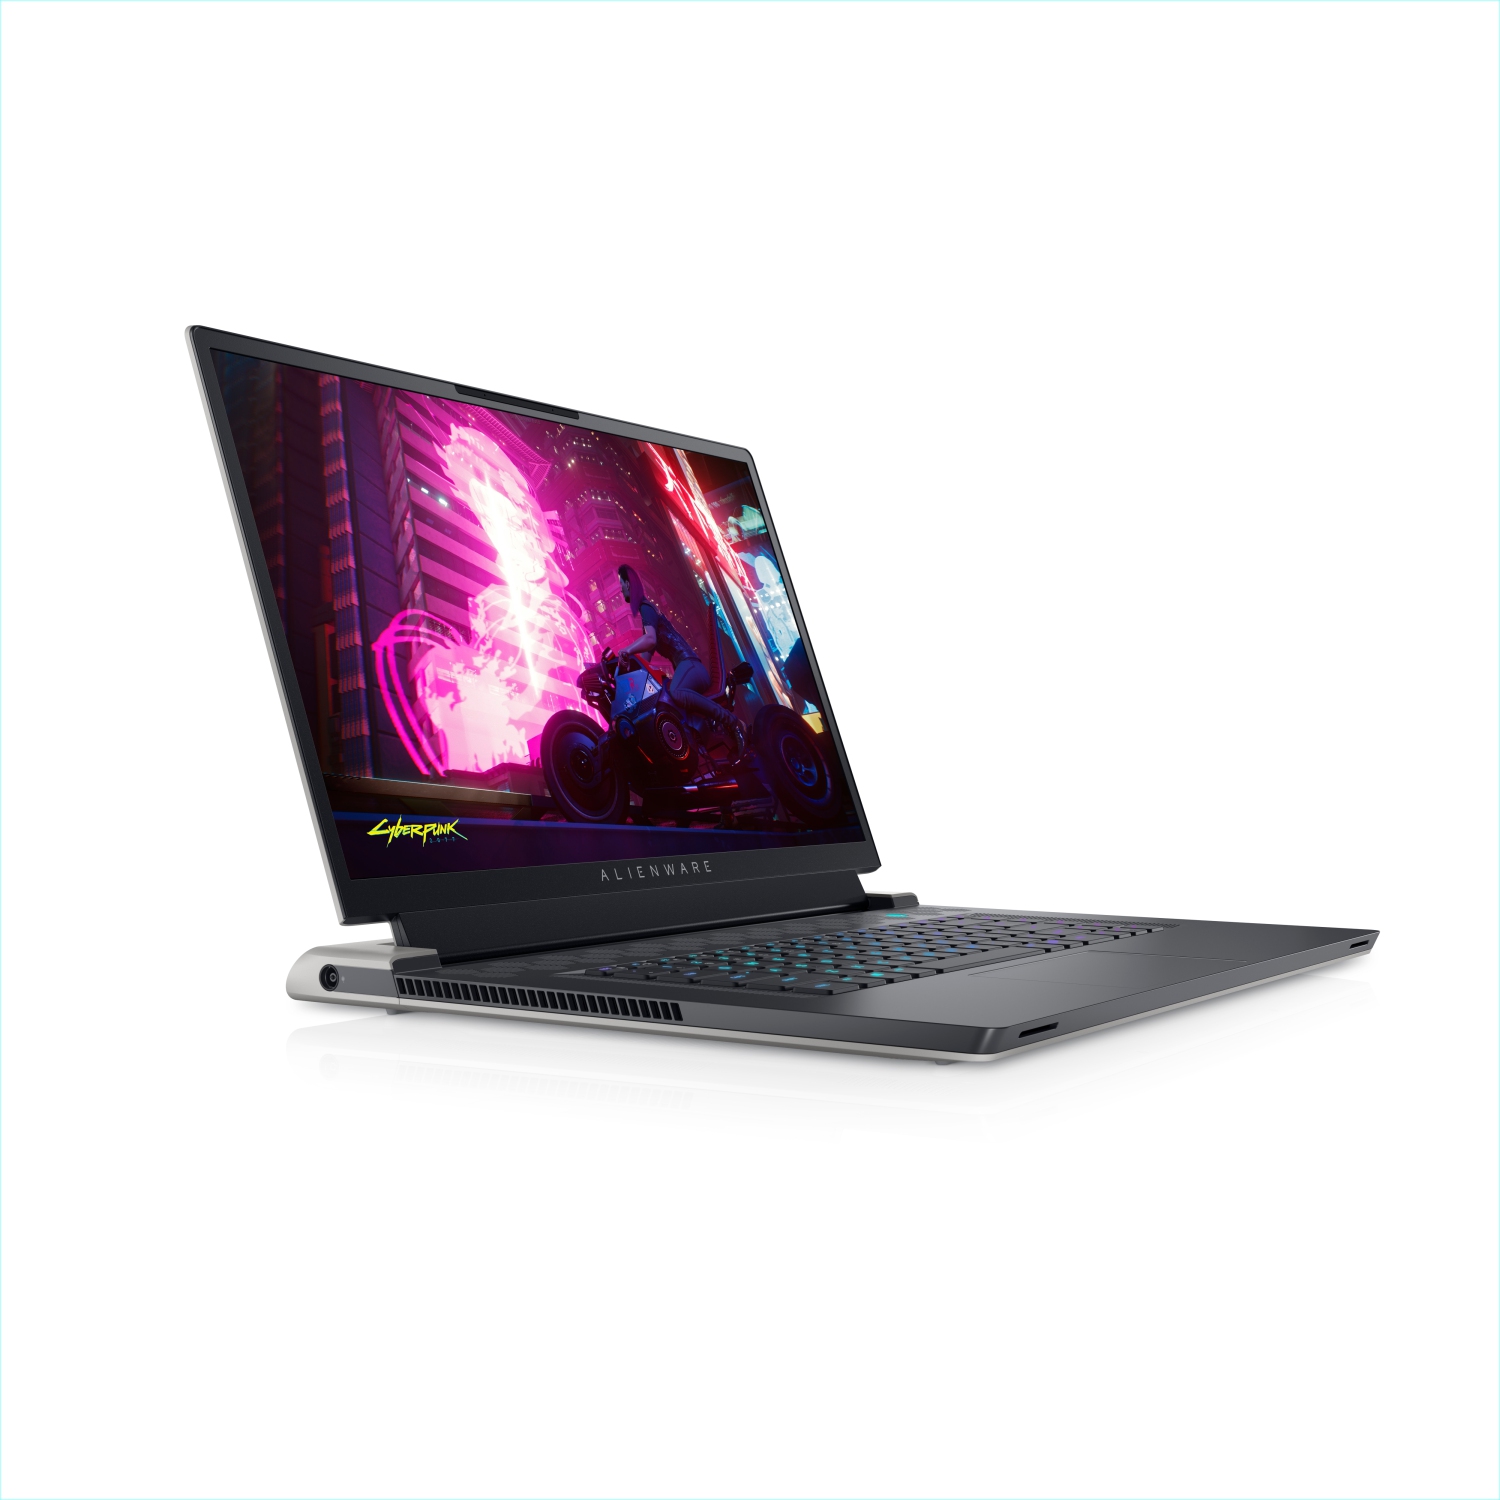 Refurbished (Excellent) - Dell Alienware X17 R1 Gaming Laptop (2021), 17.3" 4K, Core i7, 512GB SSD, 32GB RAM, RTX 3080, 8 Cores @ 4.6 GHz, 11th Gen CPU Certified